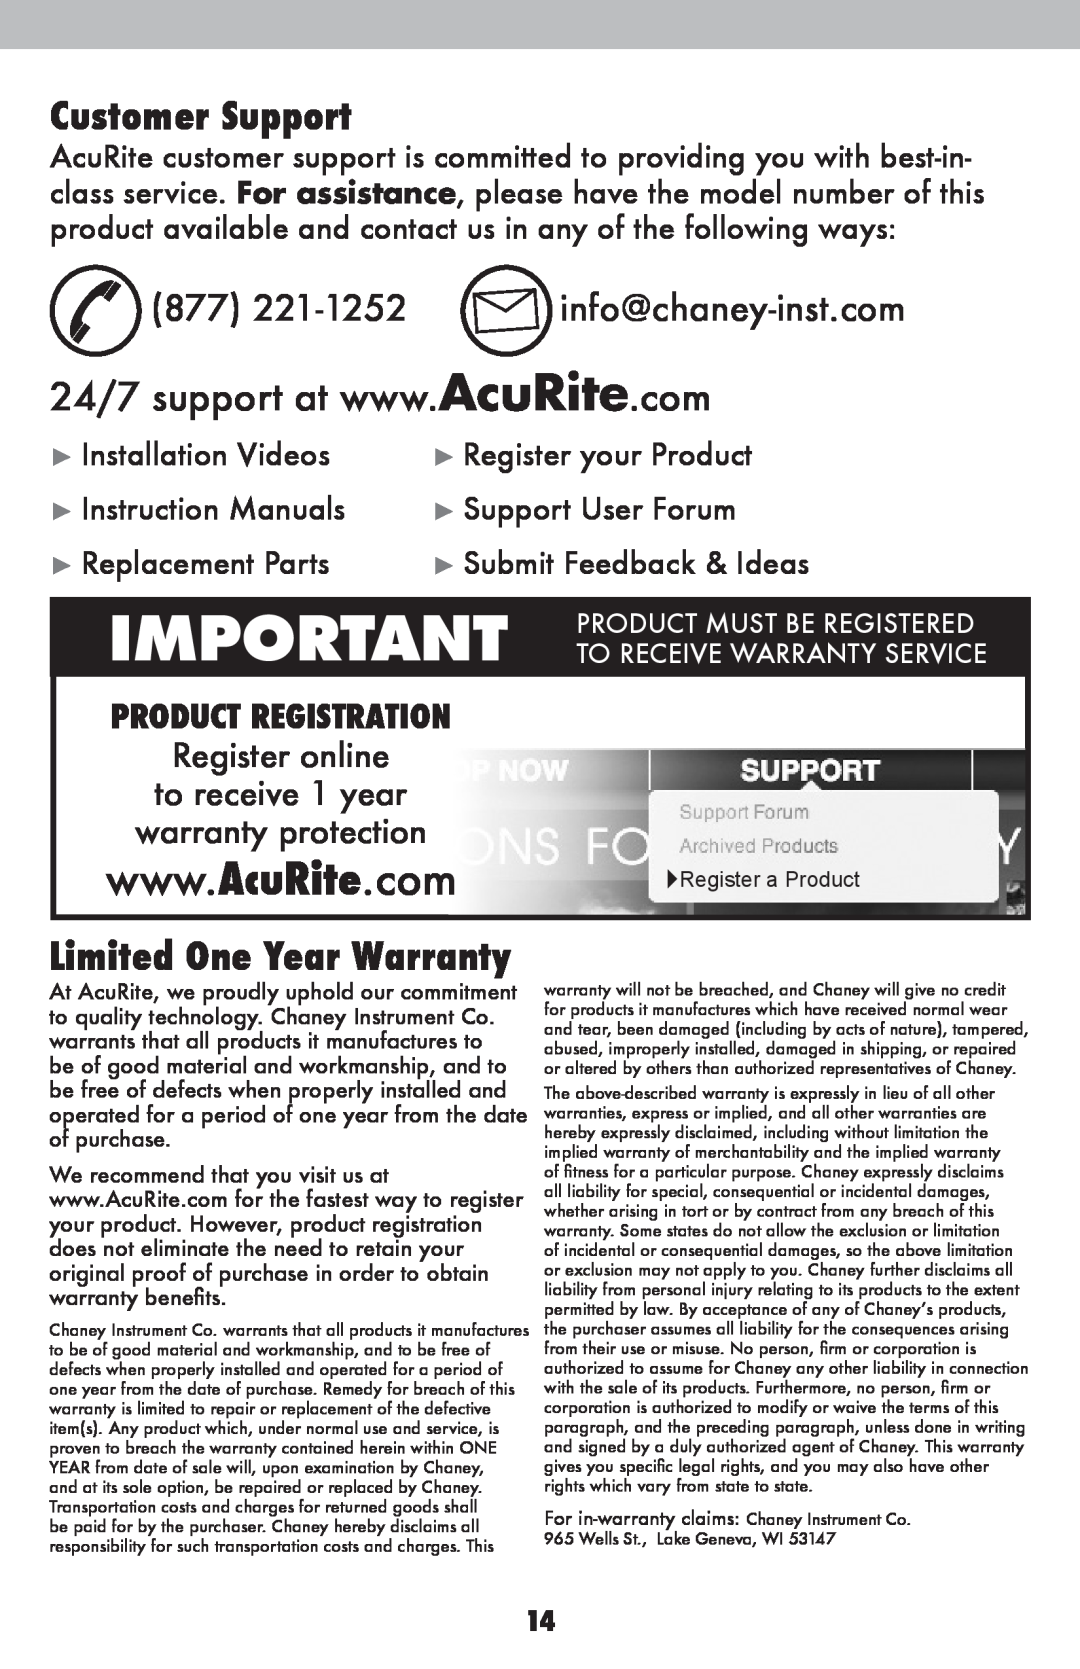 Acu-Rite 13026, 13020 Customer Support, Limited One Year Warranty, 877 221-1252 info@chaney-inst.com, Register online 